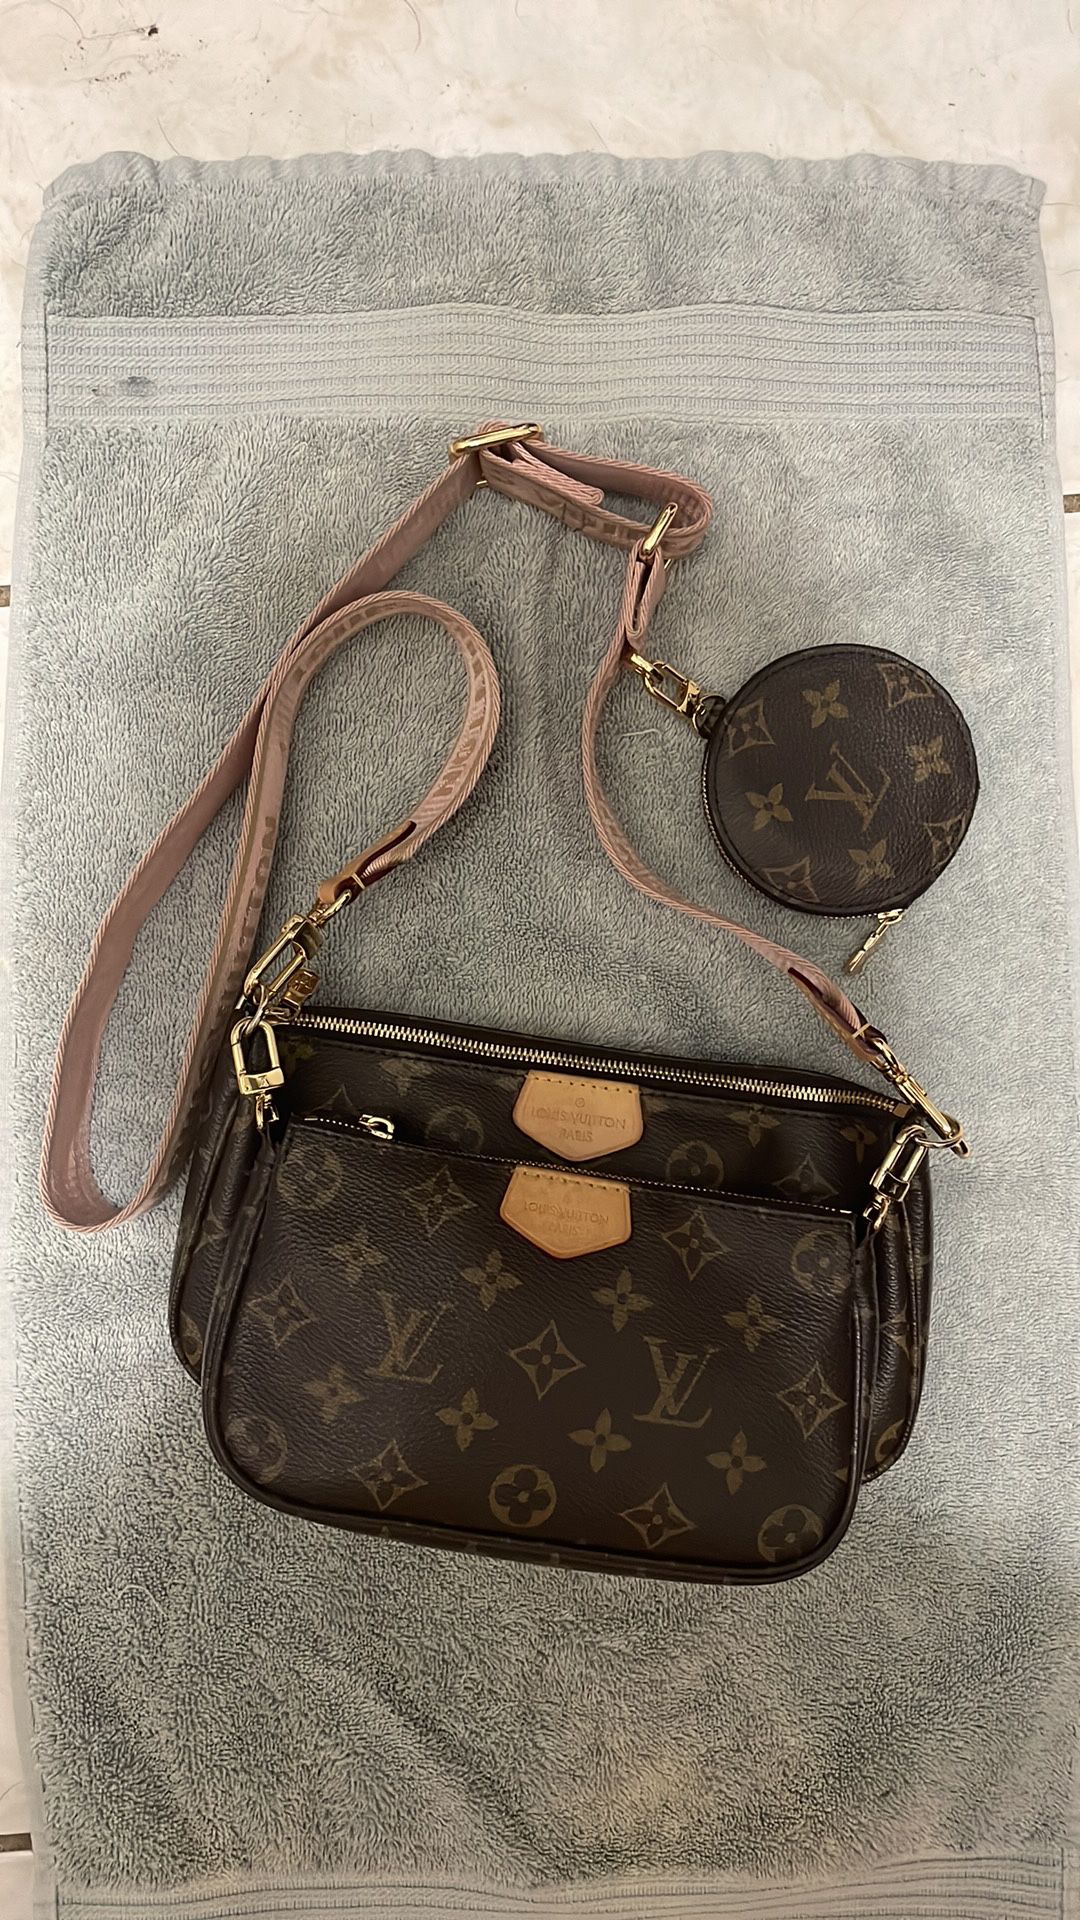 Authentic Louis Vuitton lipstick case with mirror for Sale in Plantation,  FL - OfferUp